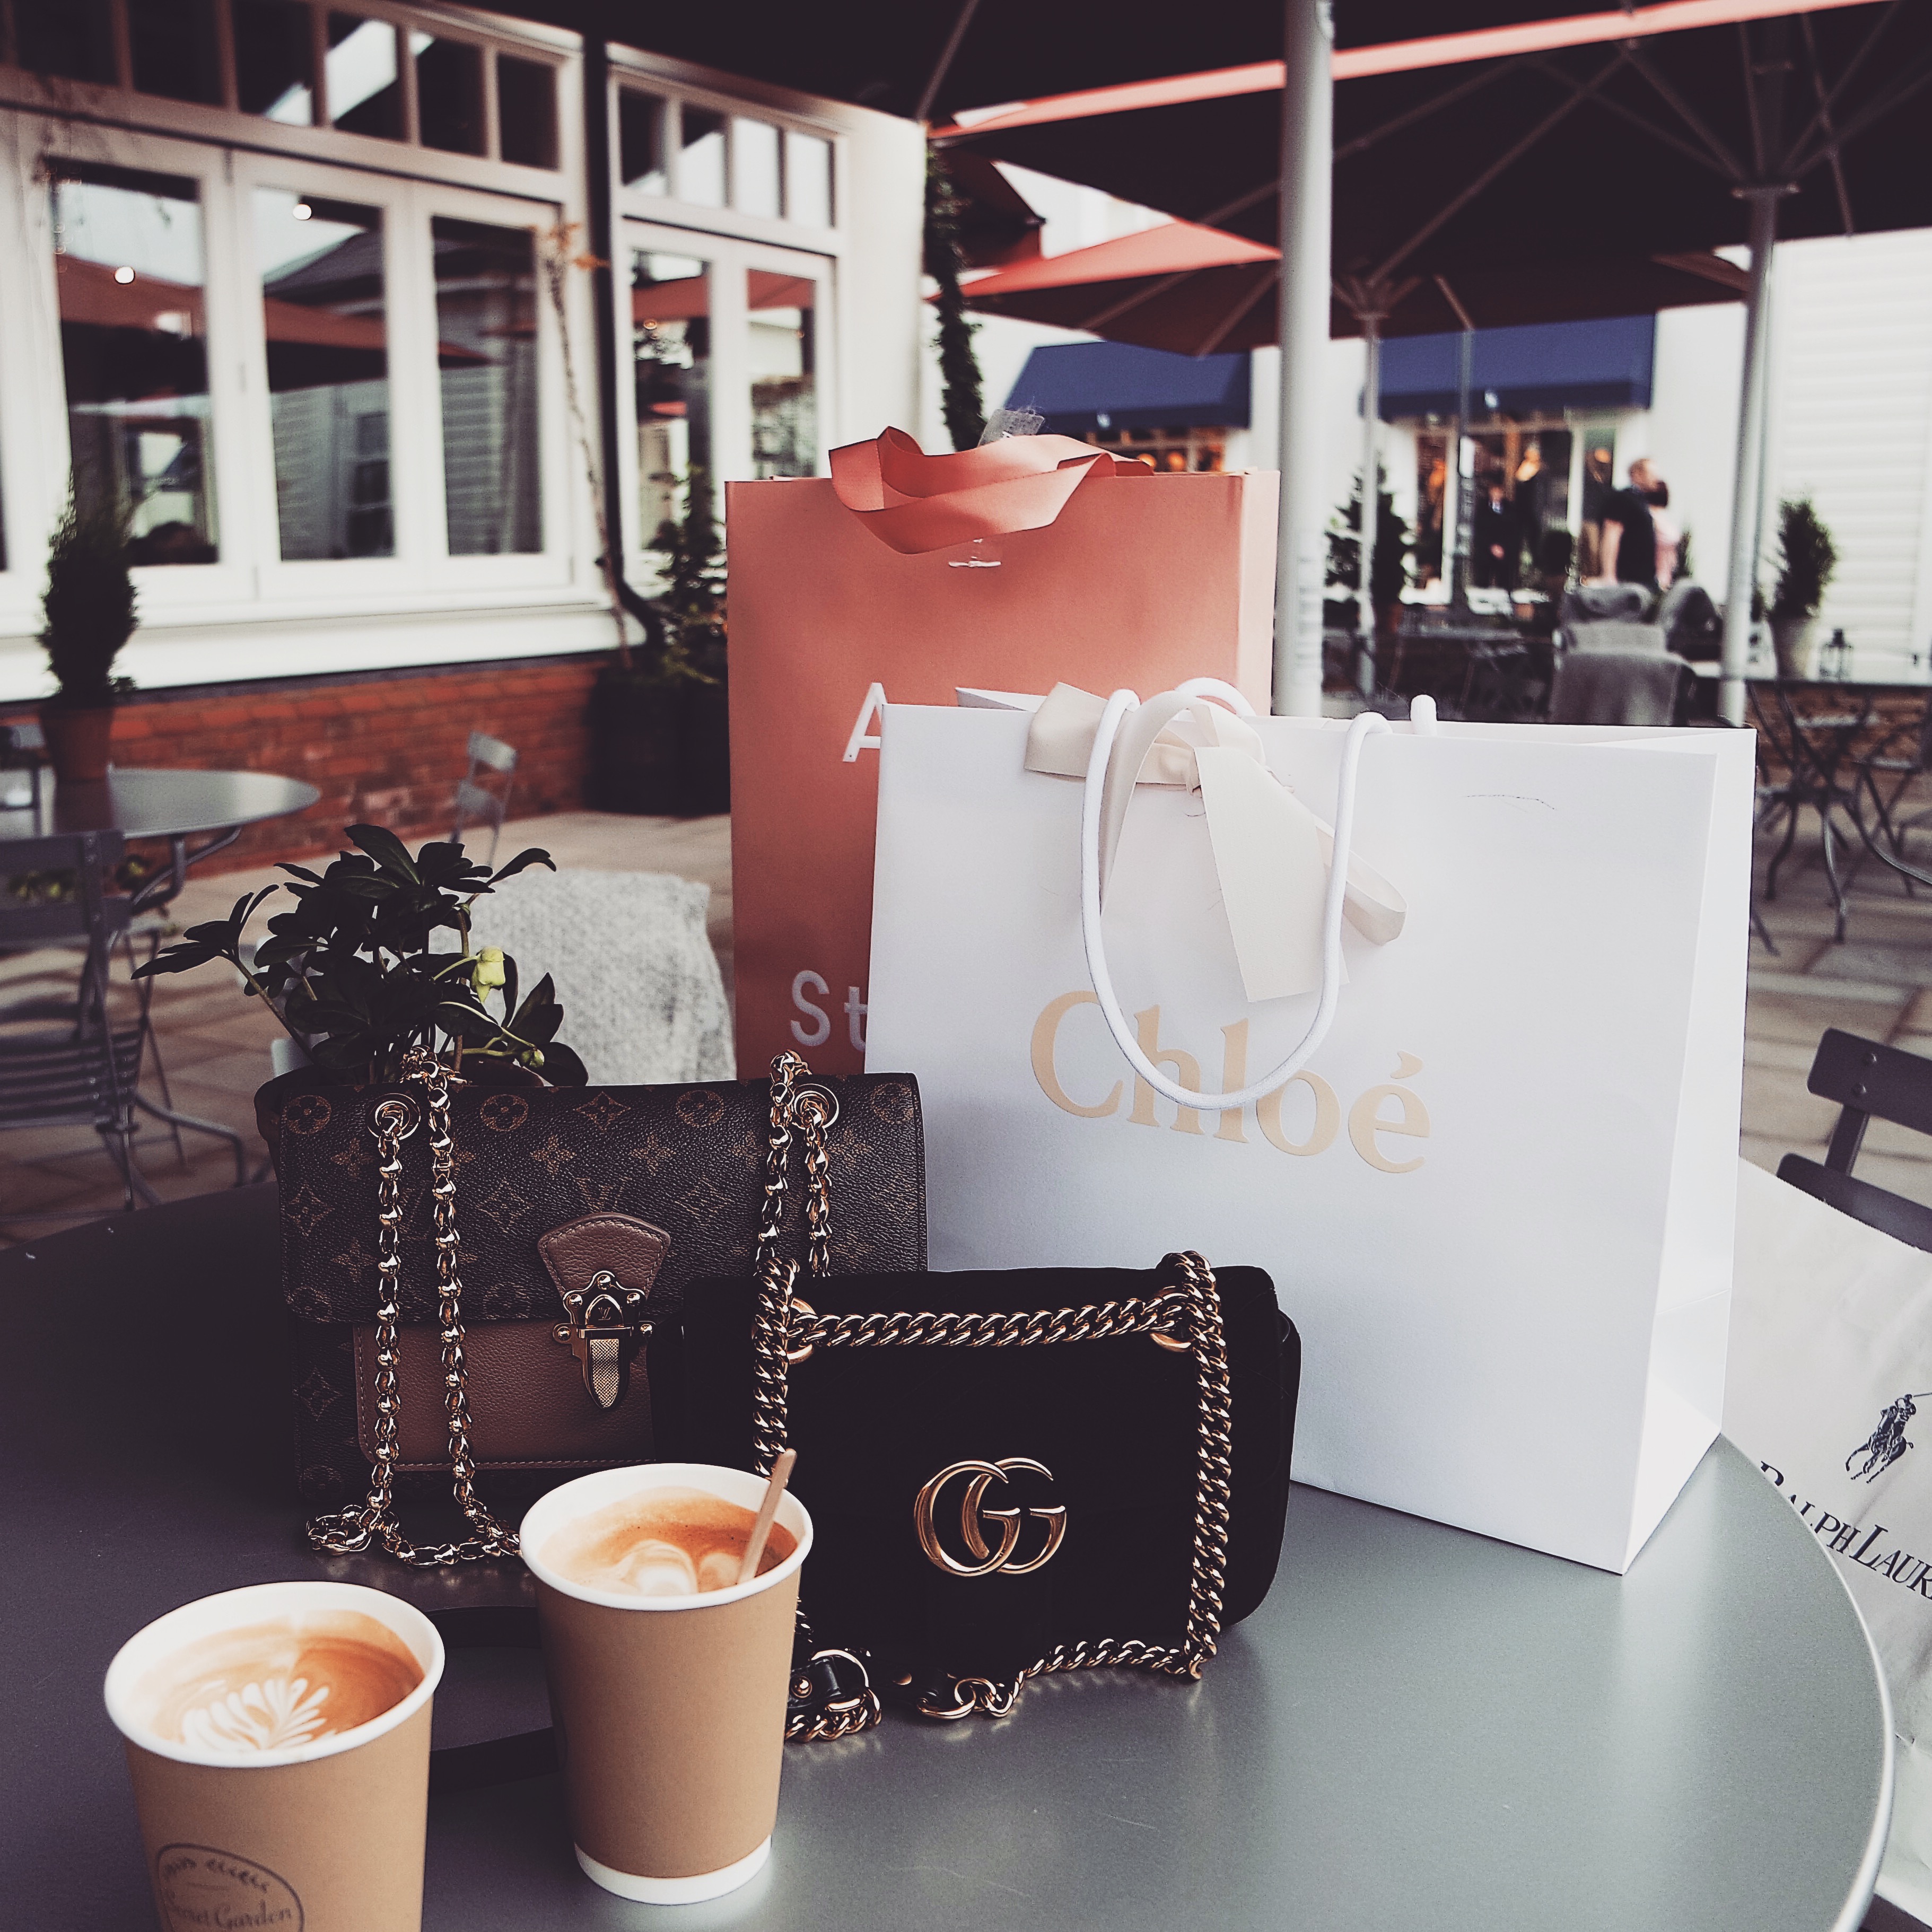 bicester village gucci contact number